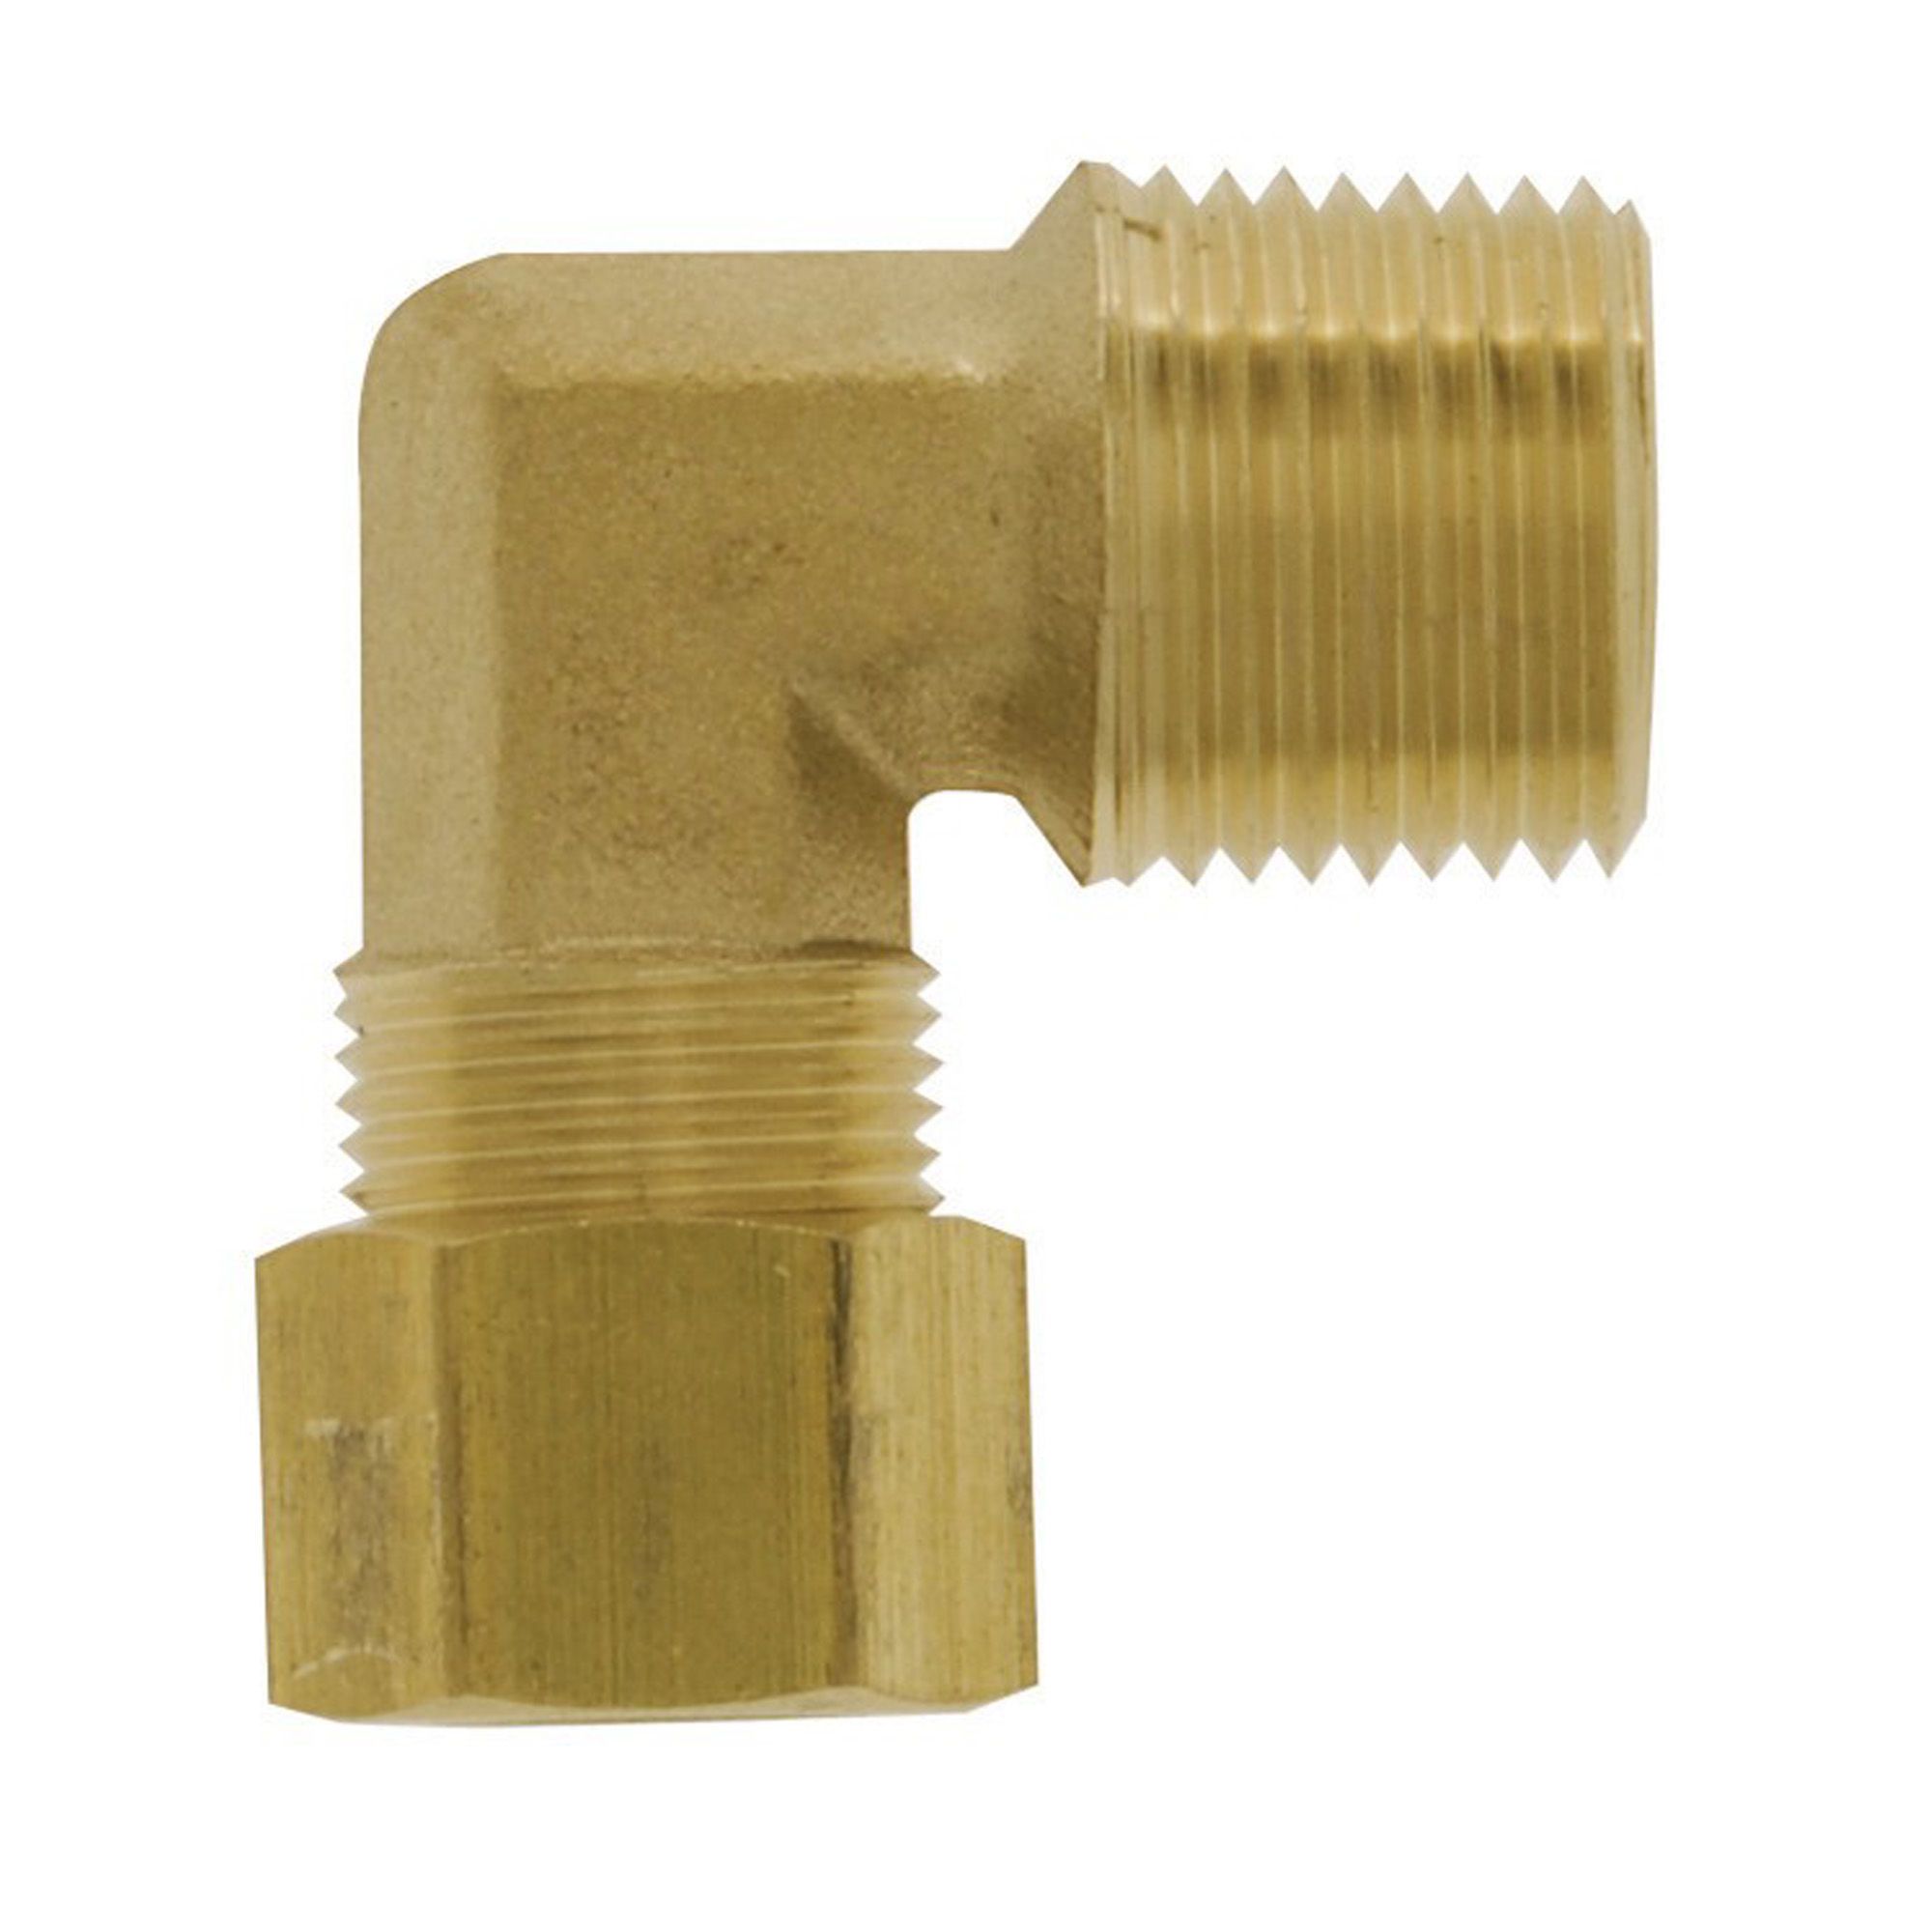 Elbow 90 degrees reduction brass 3/8 tube x 3/8 mpt compression adapter  from SANBEC CANADA